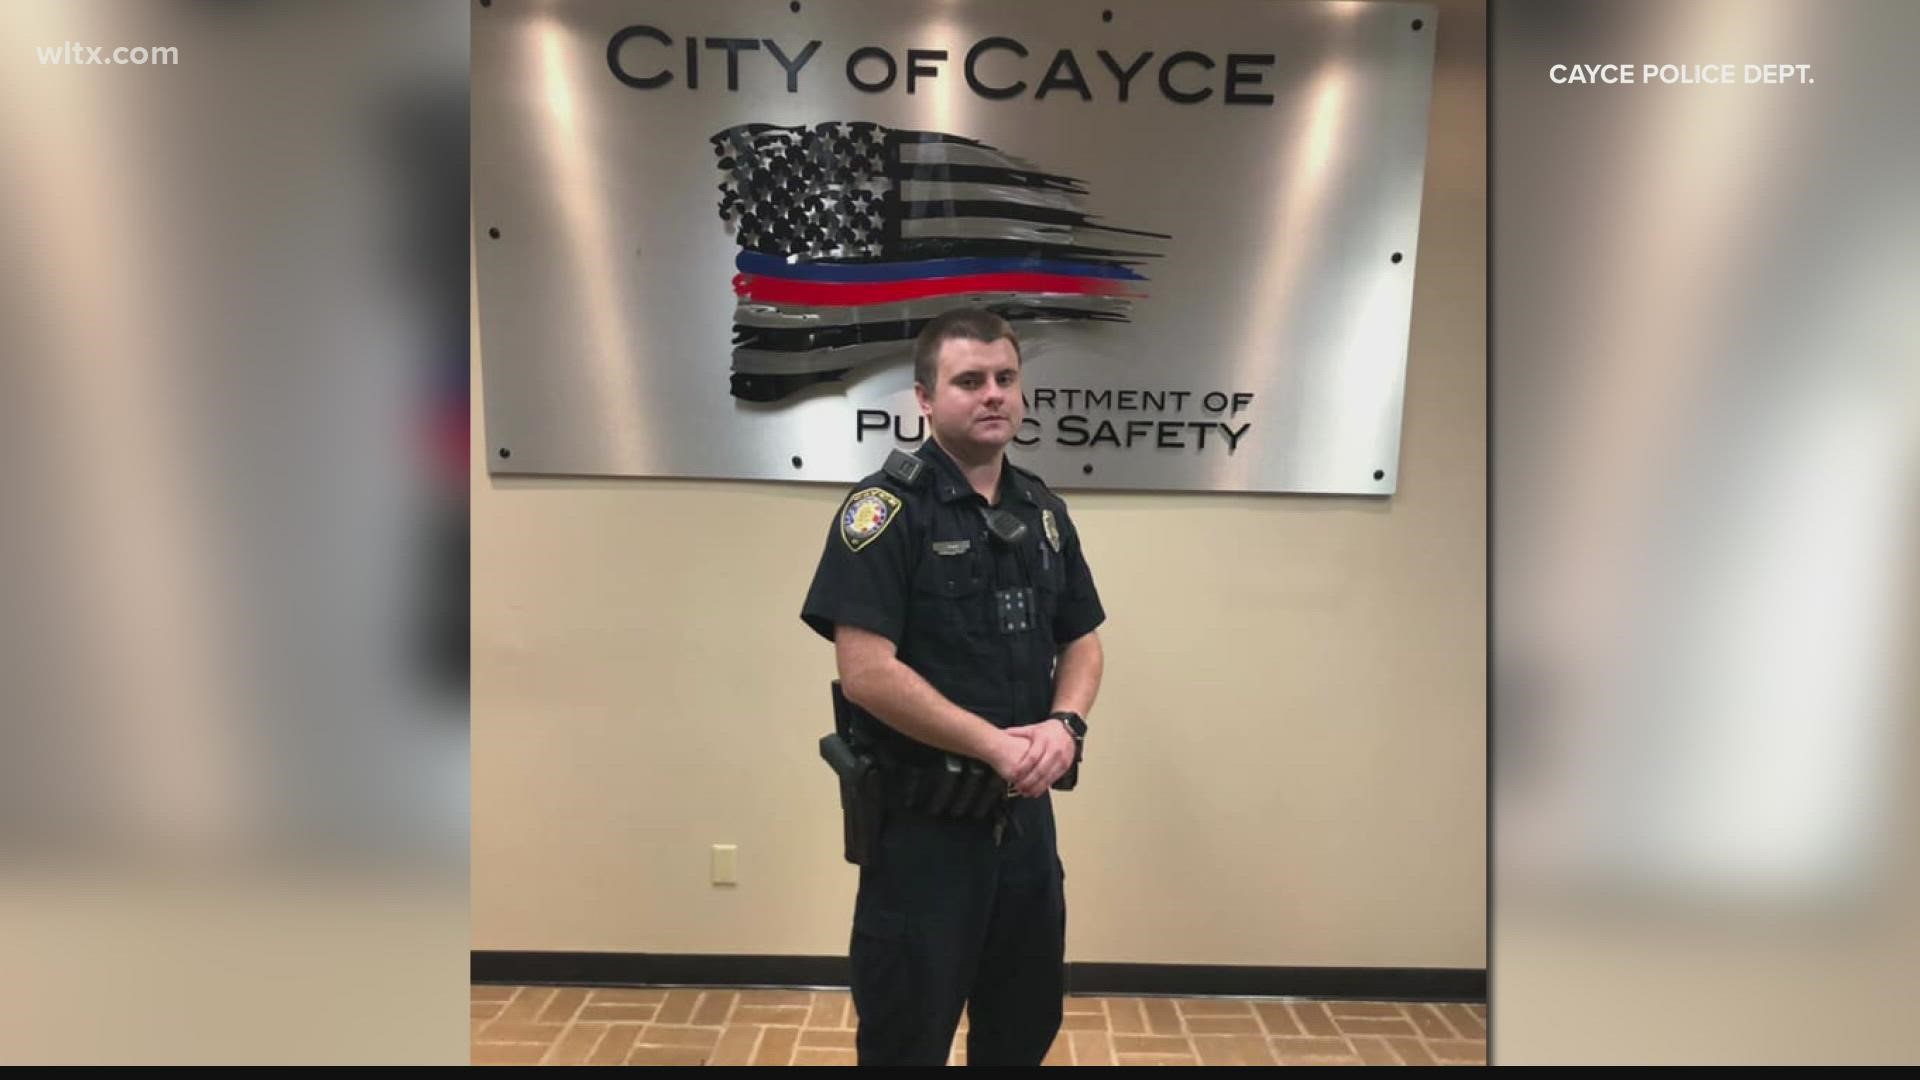 Officer Roy 'Drew' Barr is remembered in the community by those he helped the Cayce Police officer was killed in the line of duty.